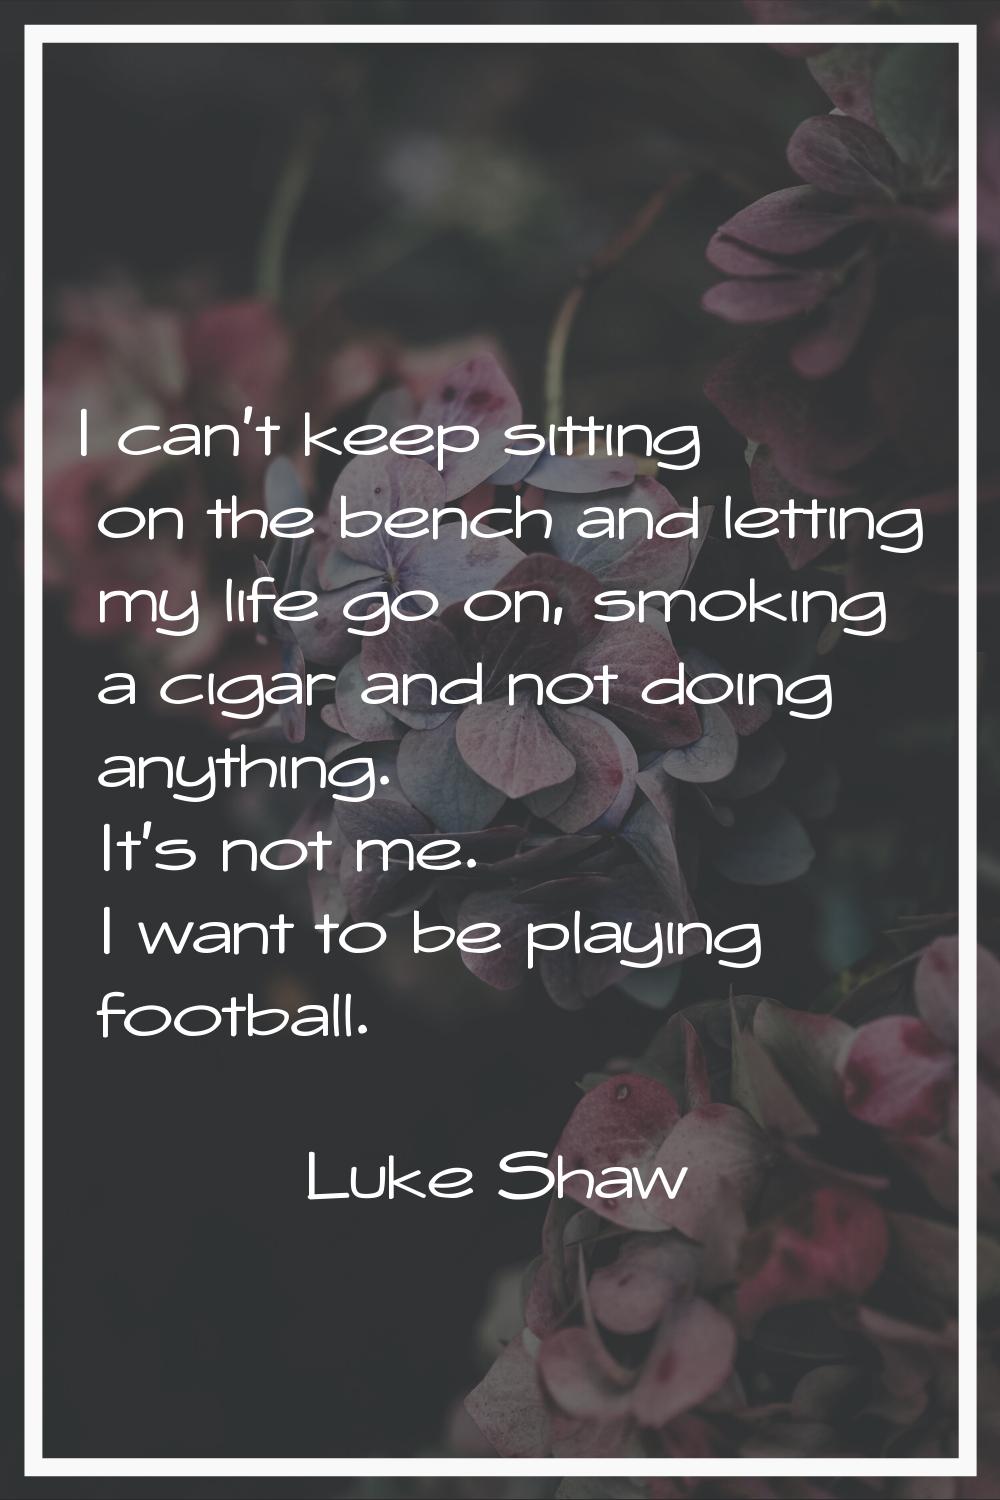 I can't keep sitting on the bench and letting my life go on, smoking a cigar and not doing anything